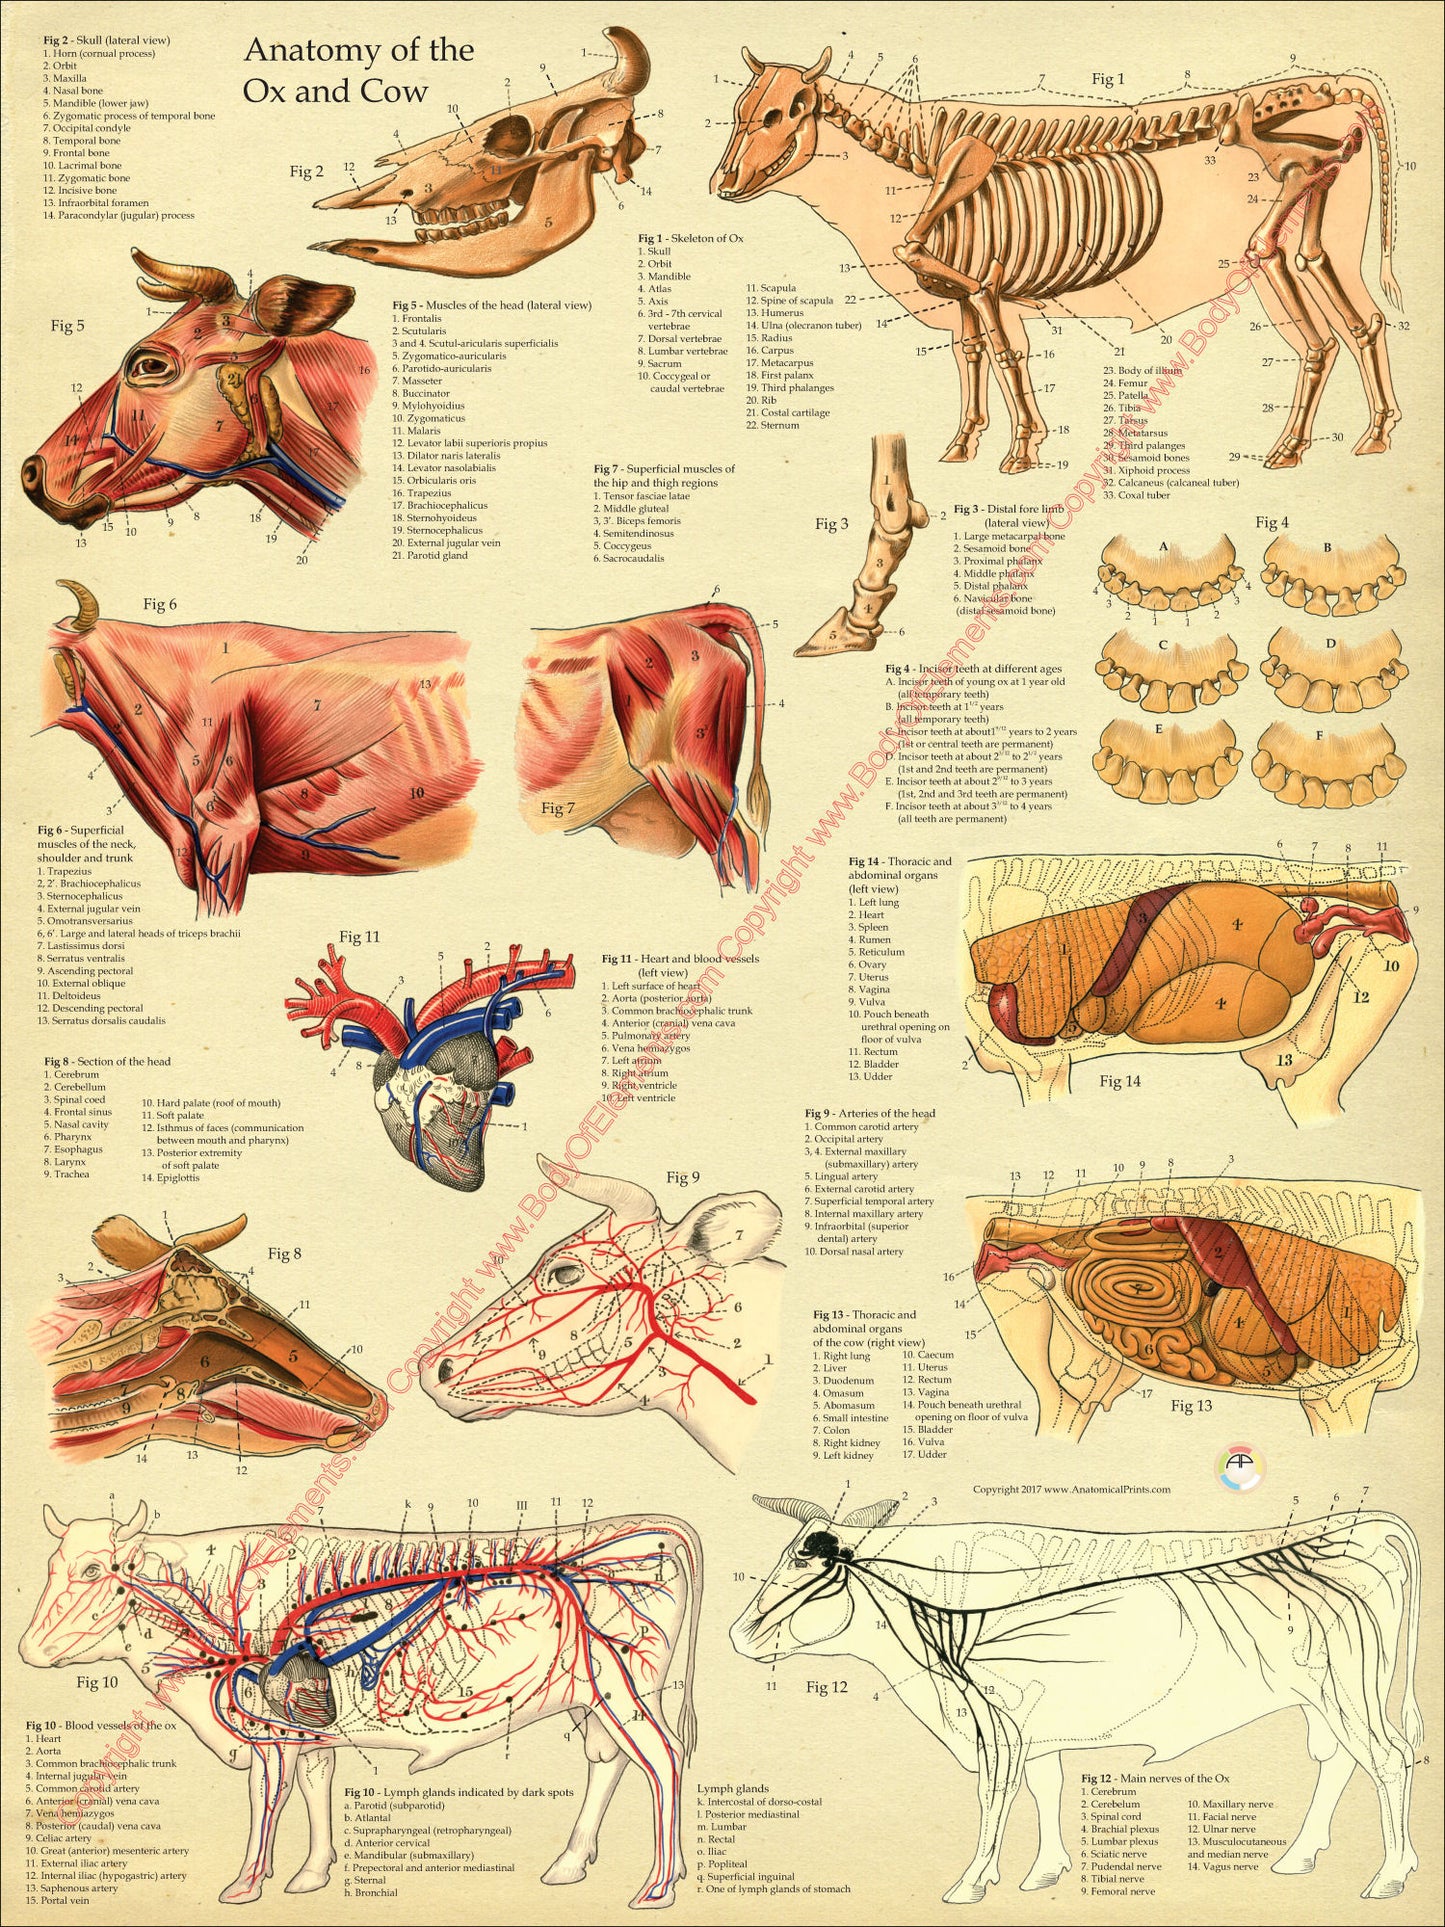 Cow anatomy poster vintage color background